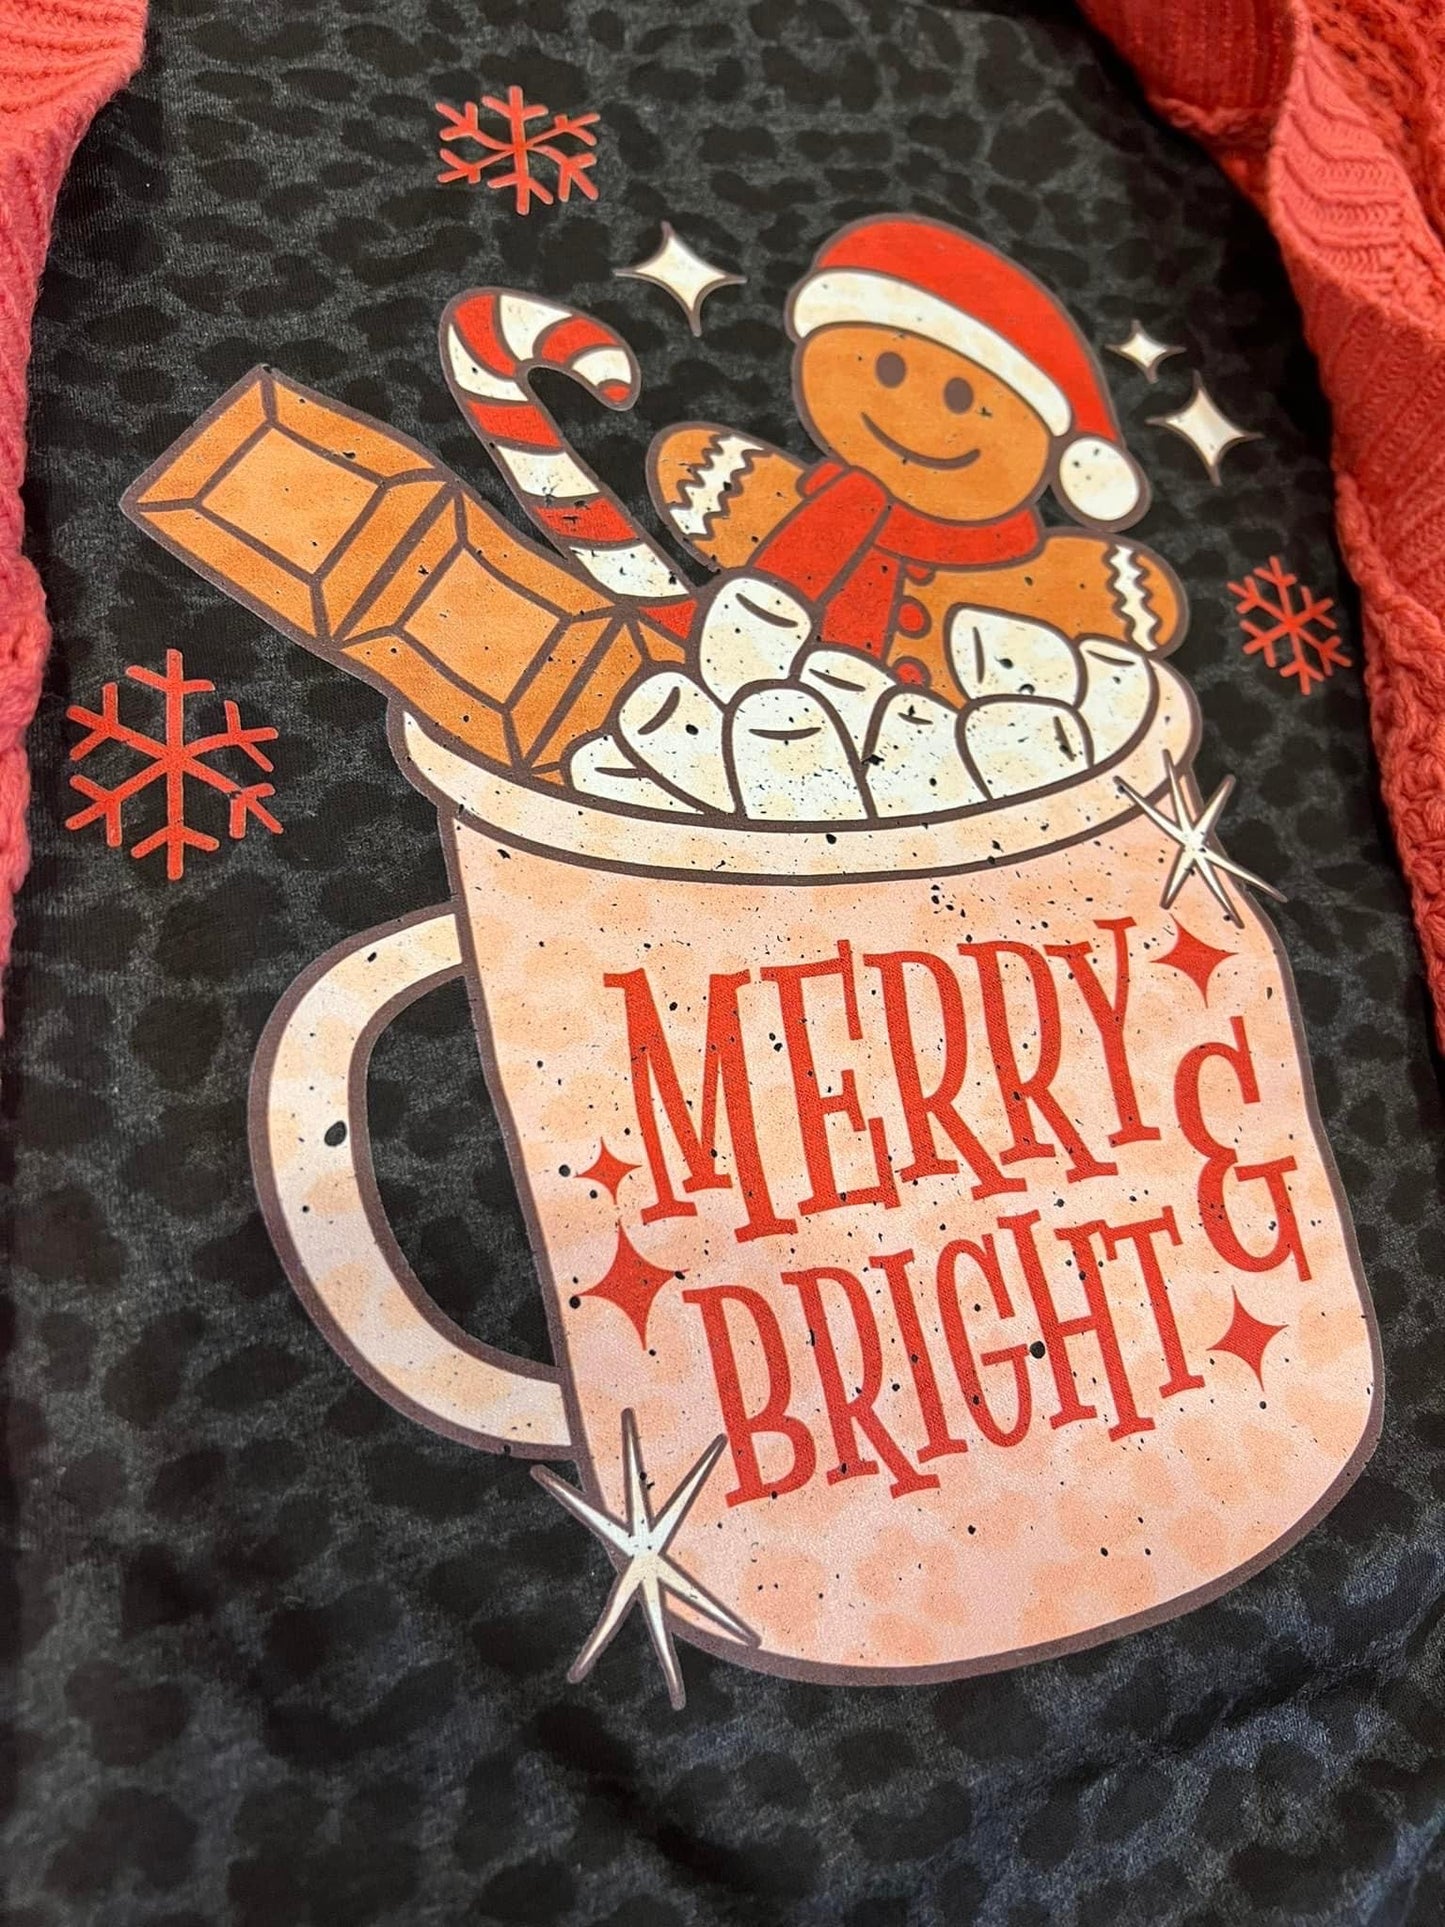 Youth and Adult Leopard Print Merry and Bright Hot Cocoa Gingerbread Shirt/ Funny Christmas Shirt